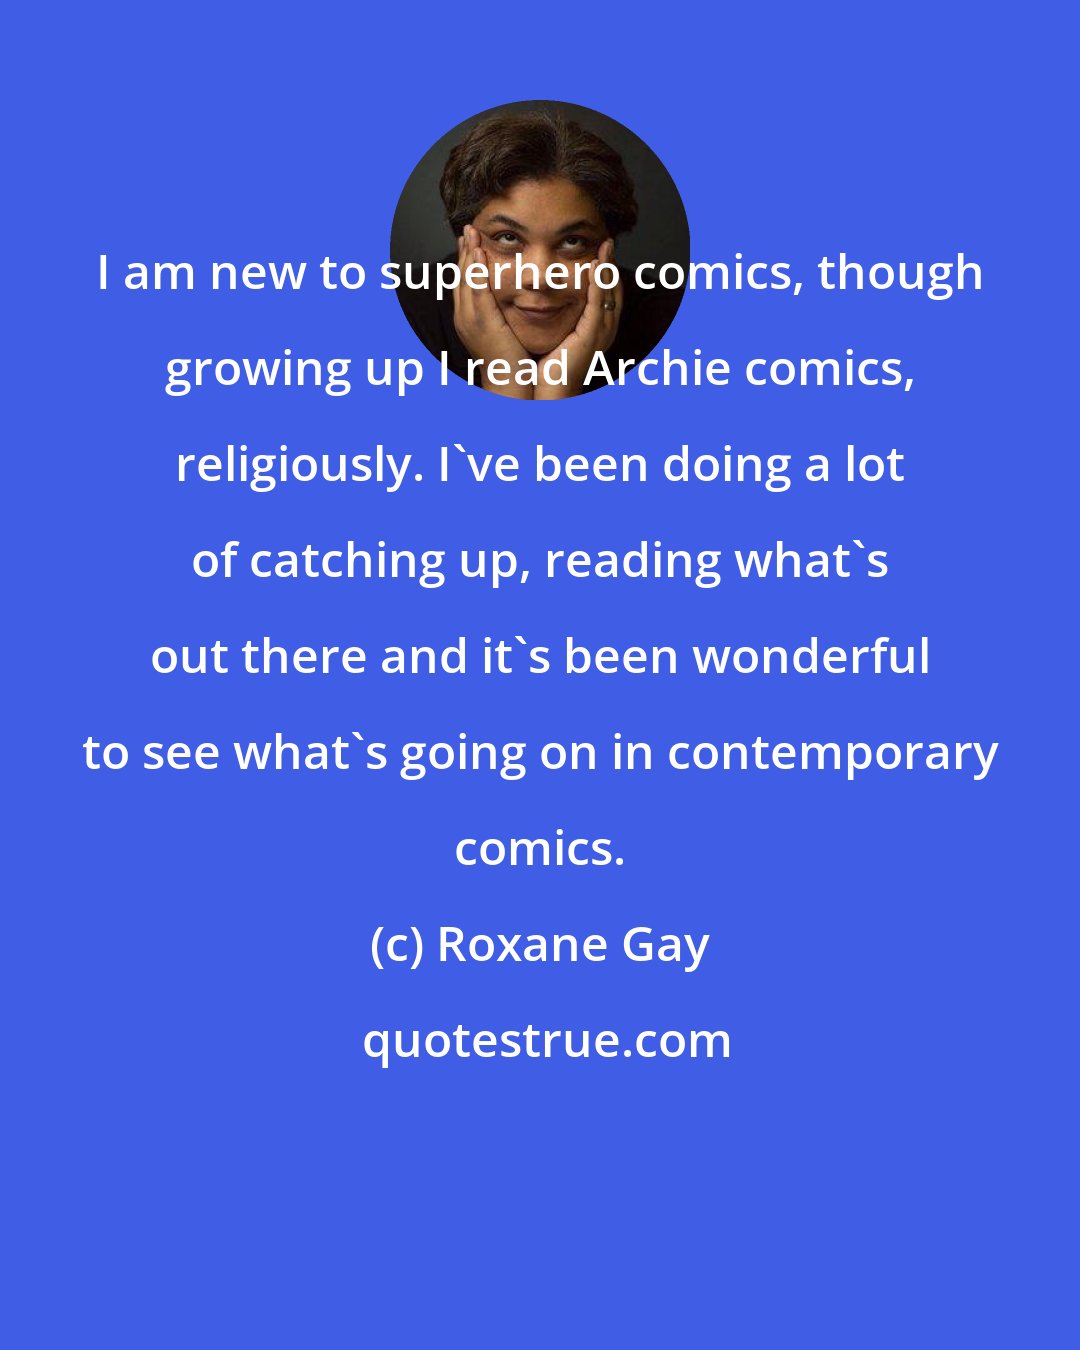 Roxane Gay: I am new to superhero comics, though growing up I read Archie comics, religiously. I've been doing a lot of catching up, reading what's out there and it's been wonderful to see what's going on in contemporary comics.